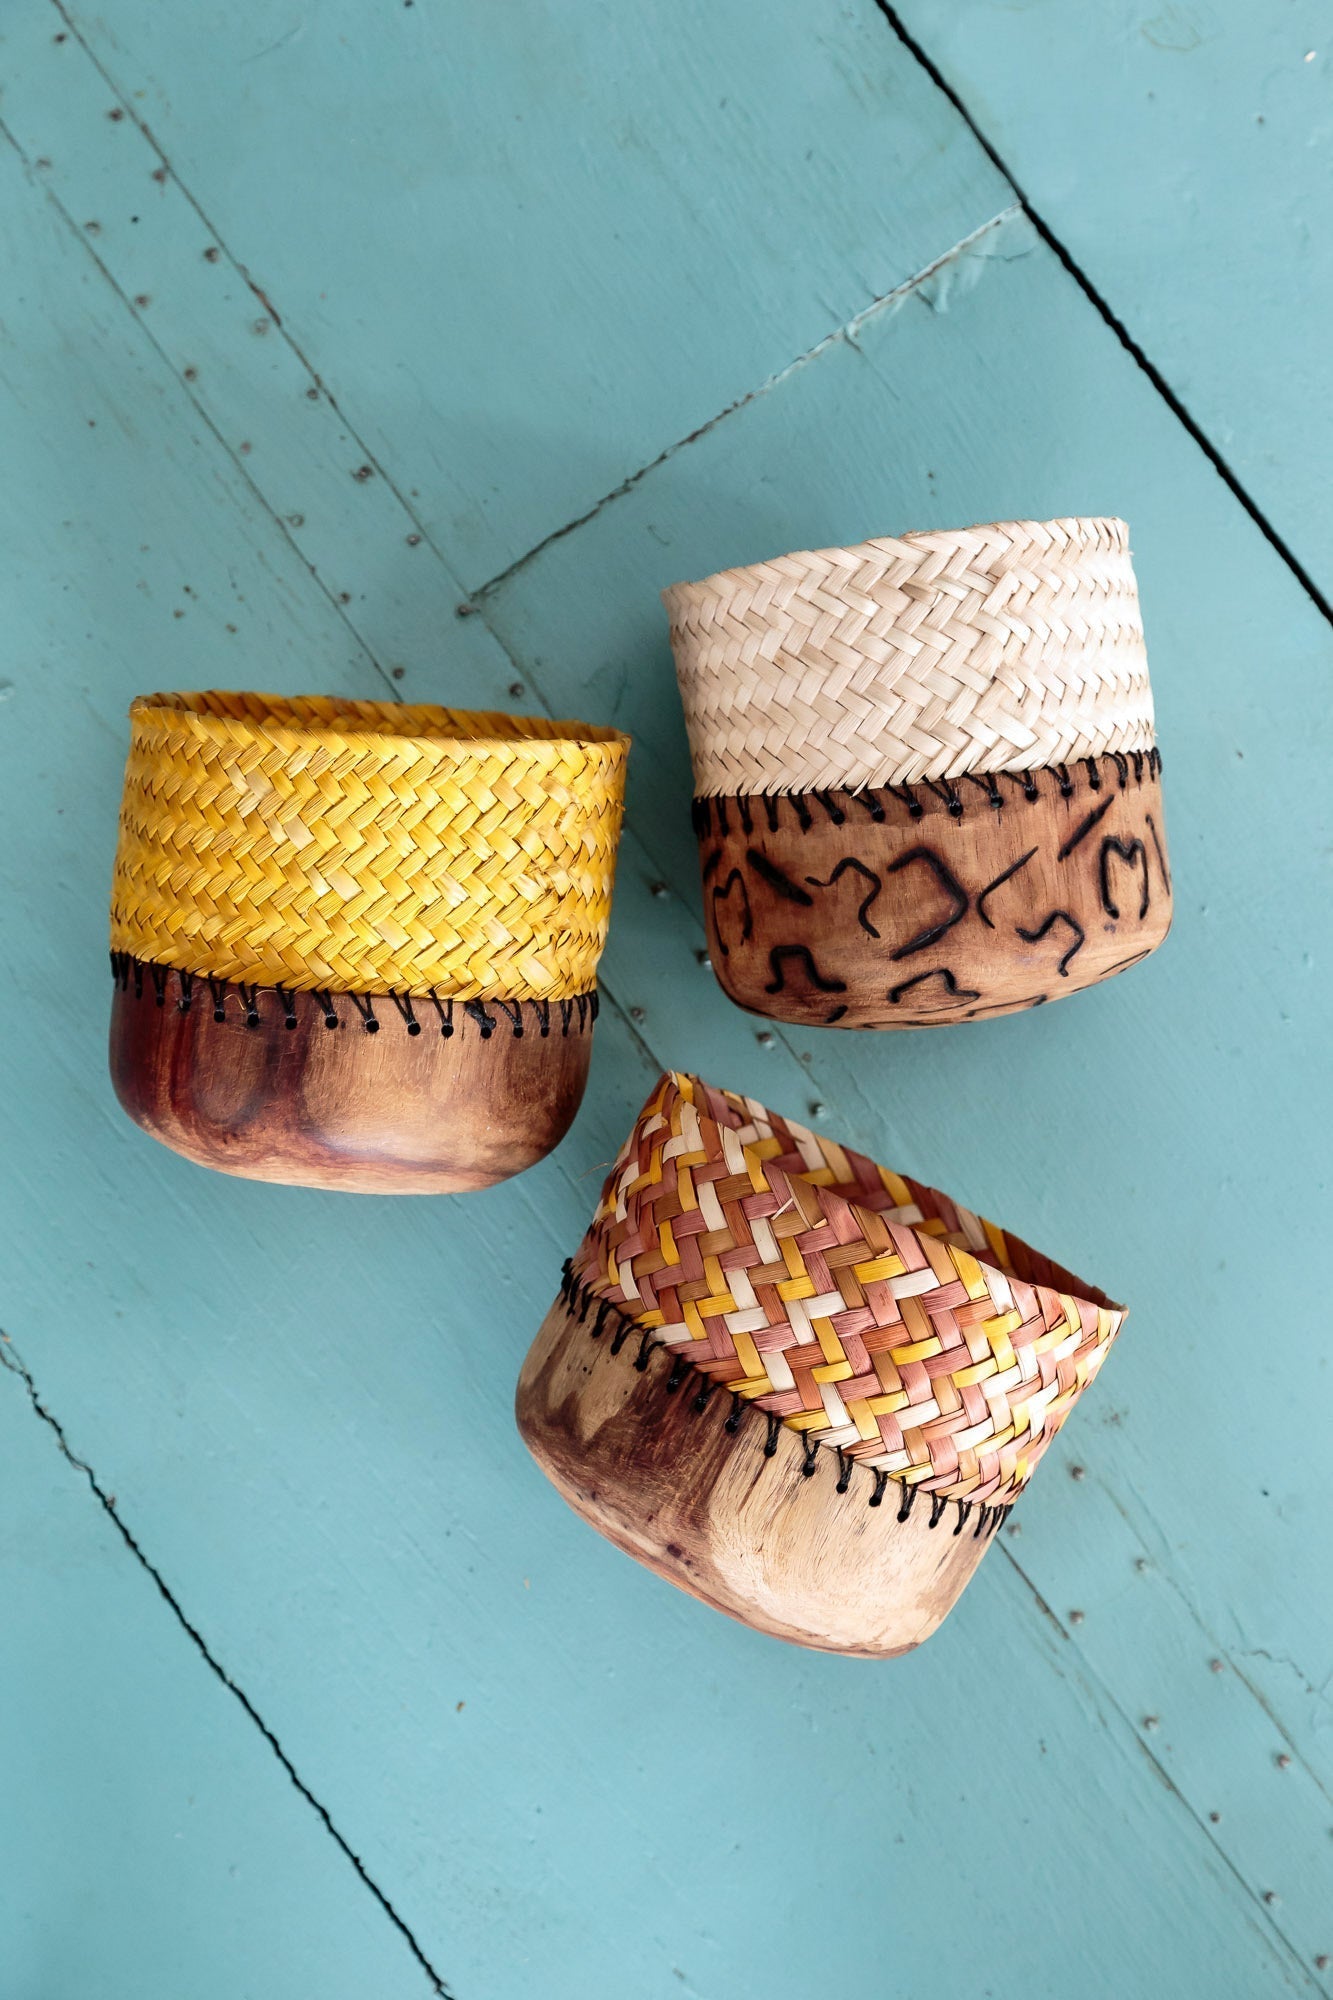 African made mustard yellow pot, is the perfect hand-carved and woven item that doesn't trade sustainability for style.